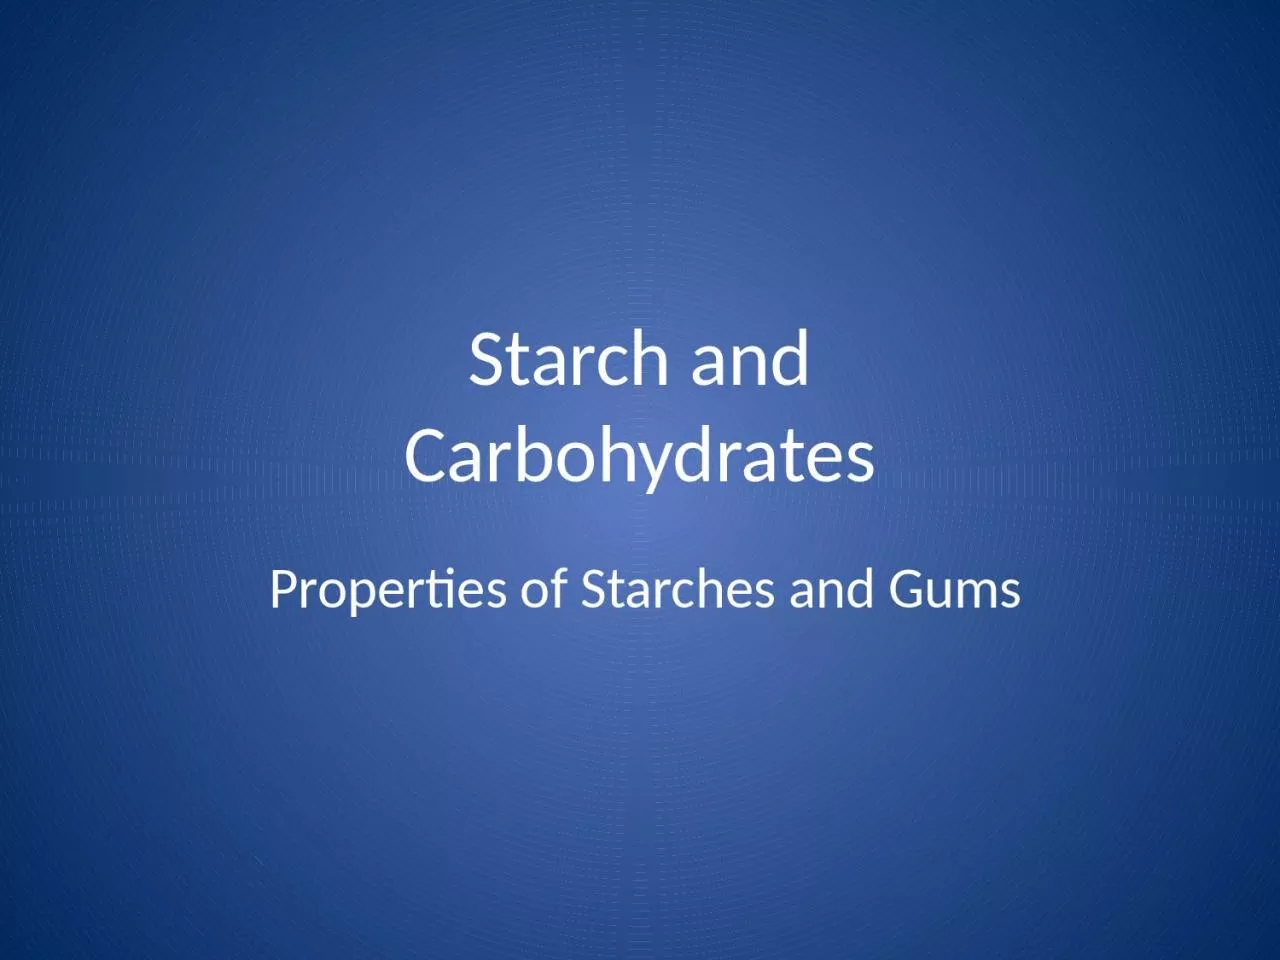 Starch and Carbohydrates